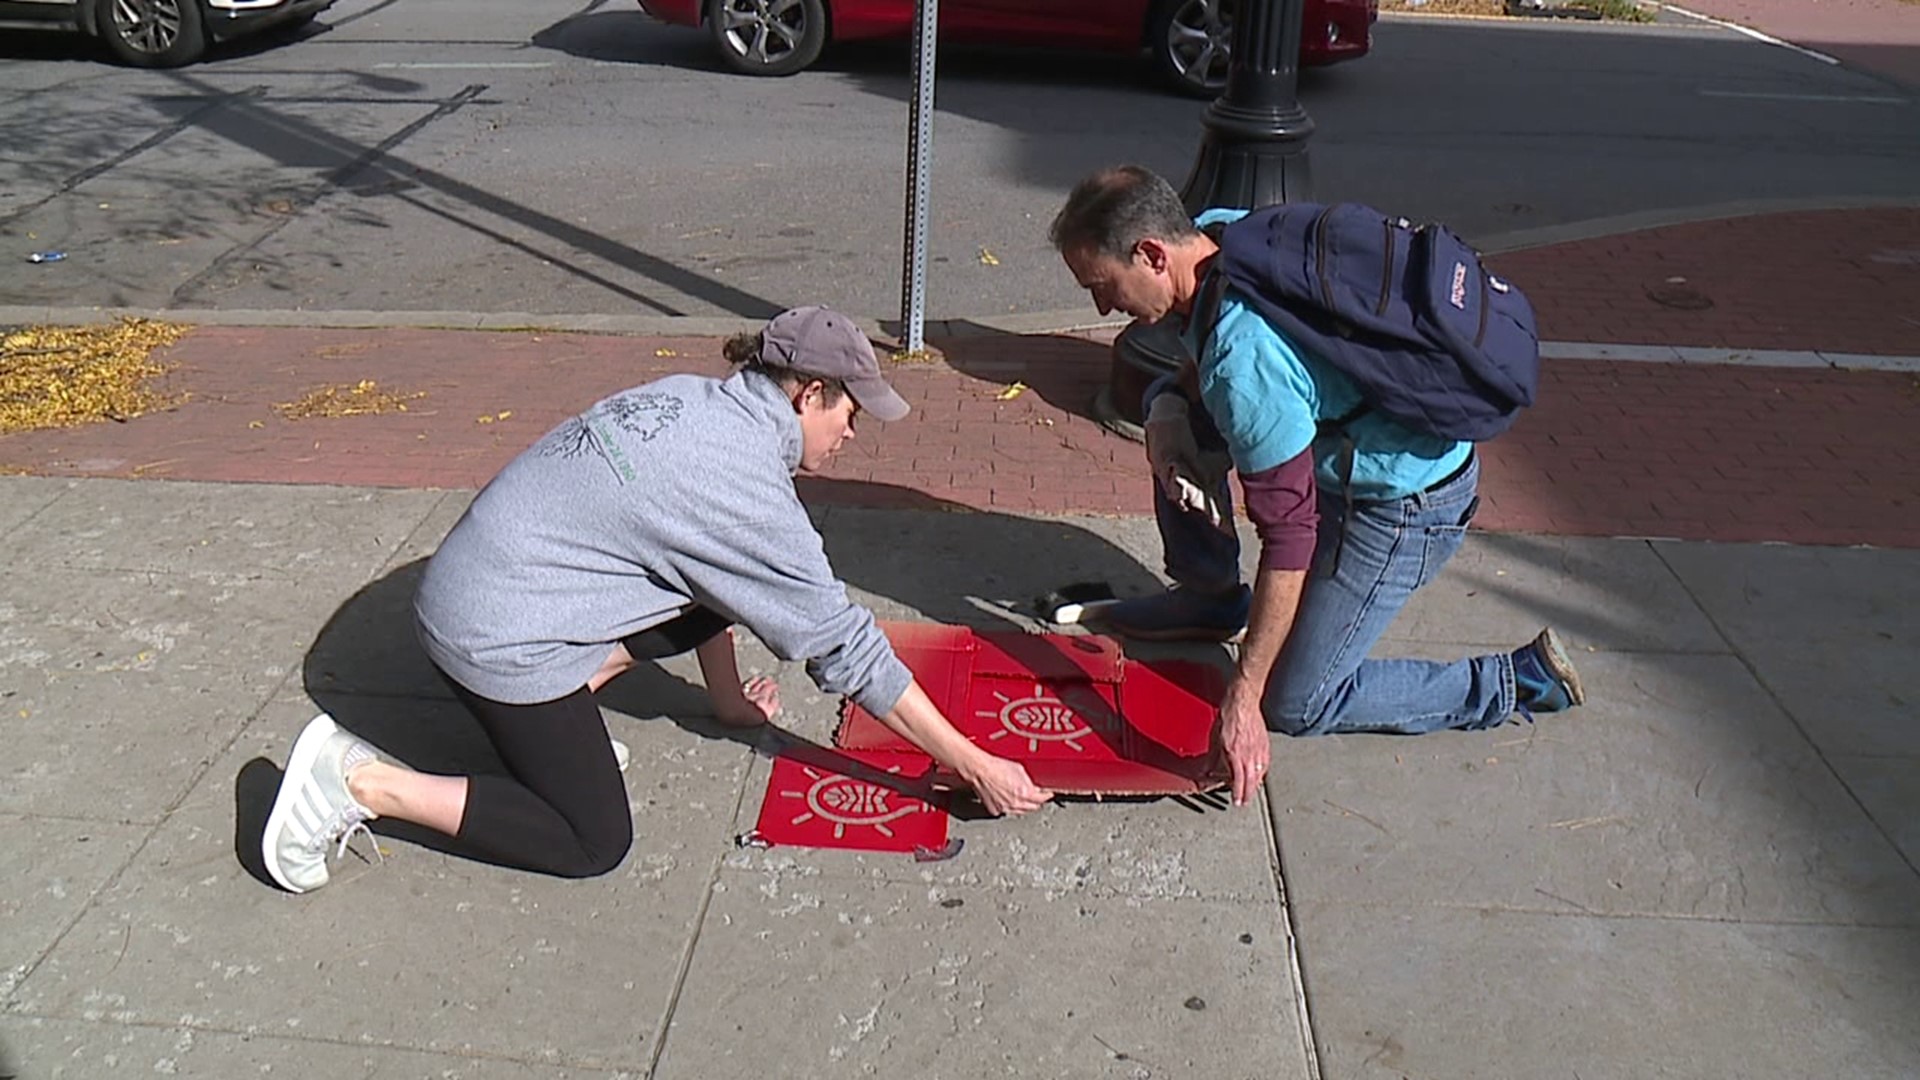 A non-profit organization is helping to guide folks throughout the city with painted footprints.